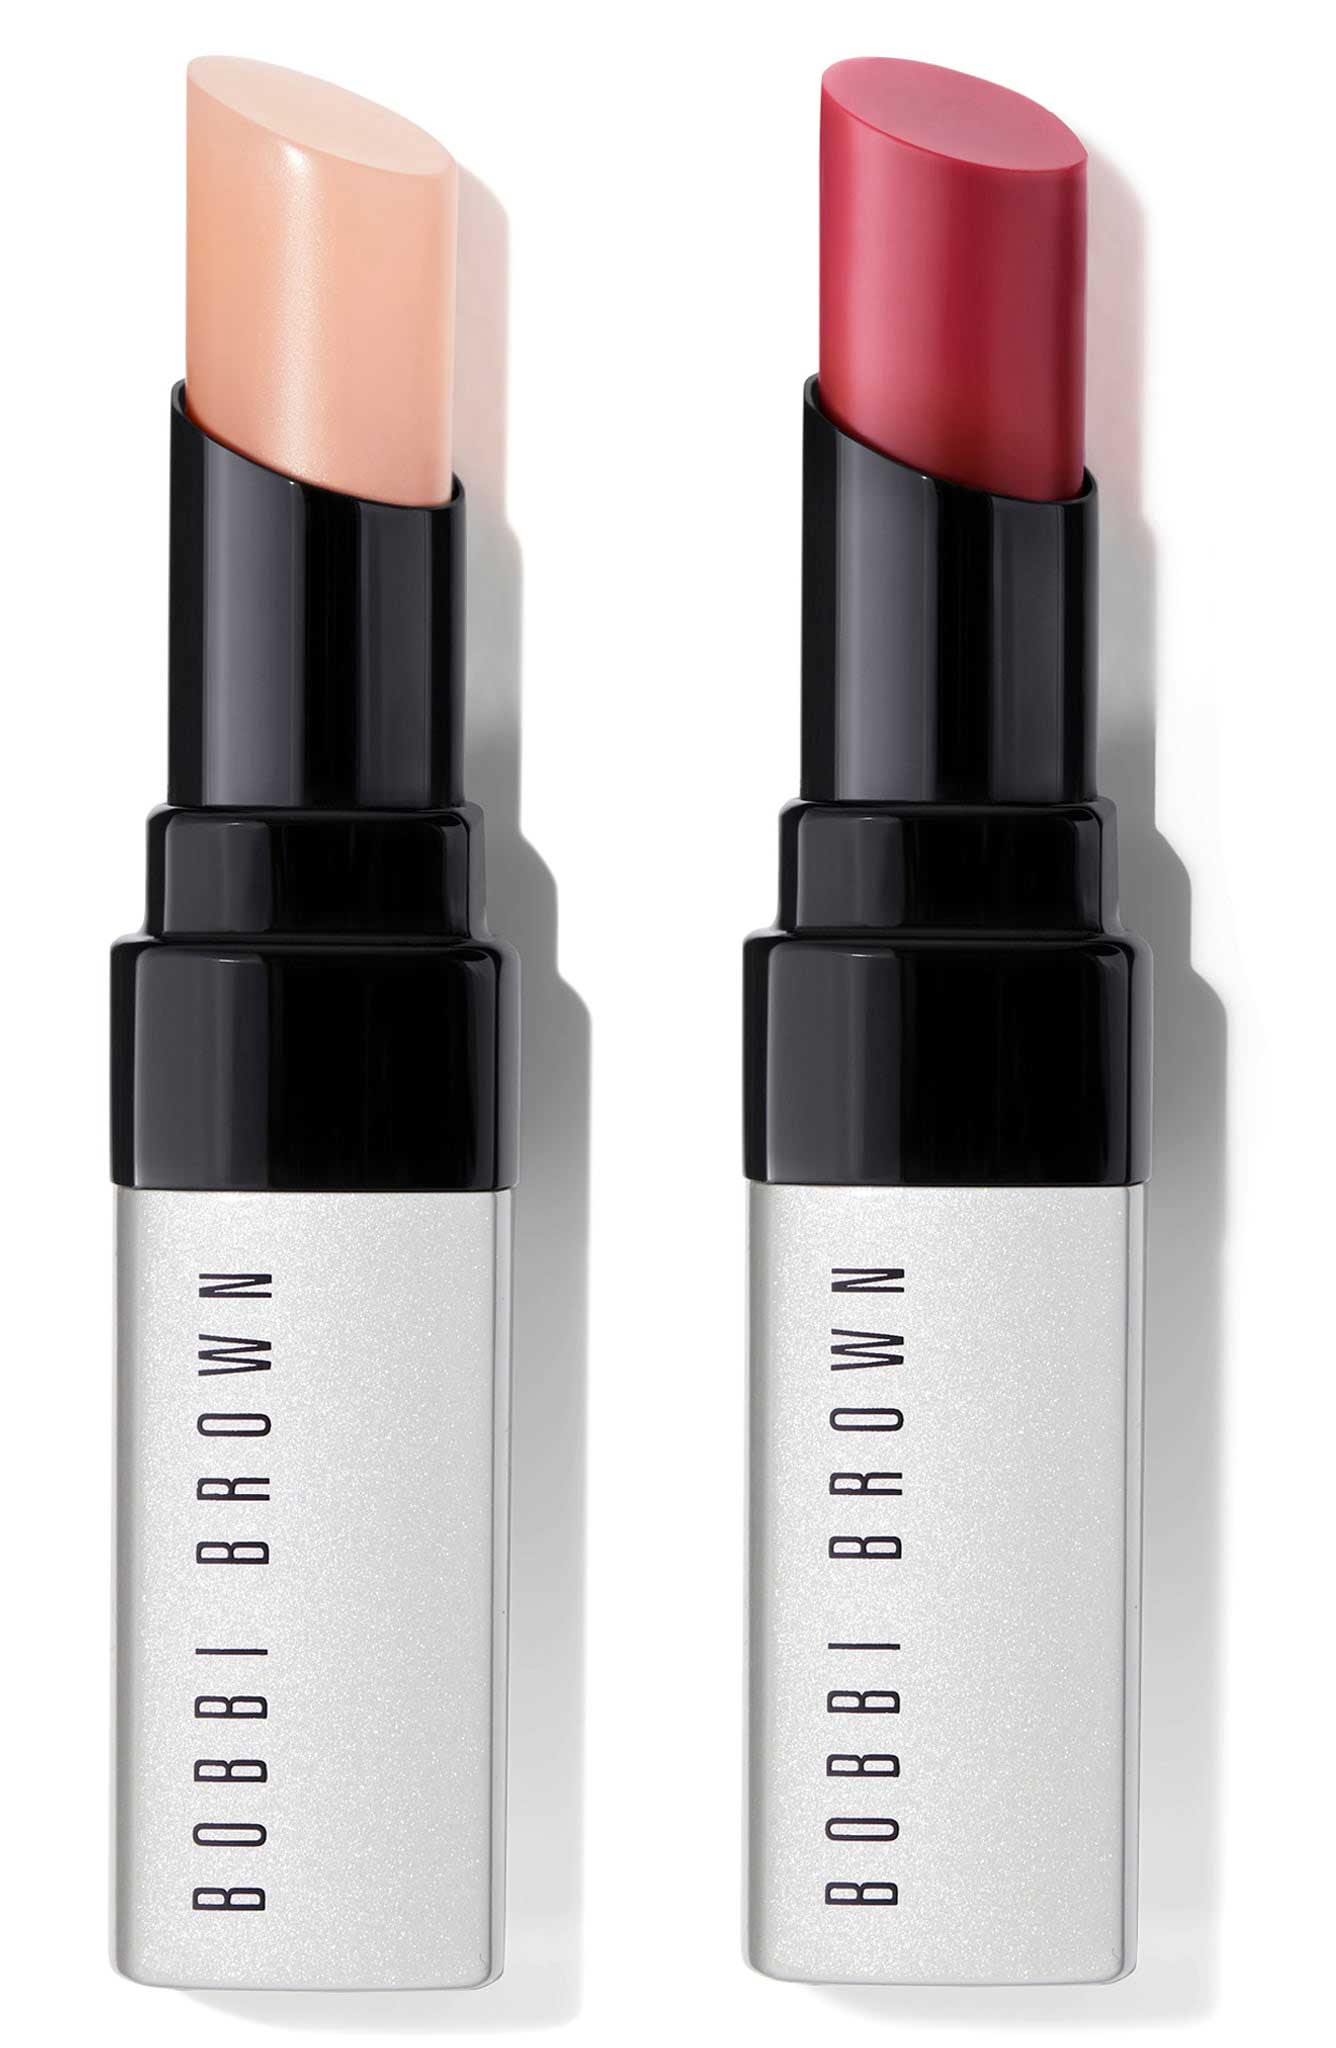 Bobbi Brown Extra Lip Tint Duo: I am so excited about this new shade, available only at Nordstrom for Anniversary Sale! I like a shine when keeping it natural, and this tint adds the right amount of pink while keeping my lips conditioned (even under a mask).